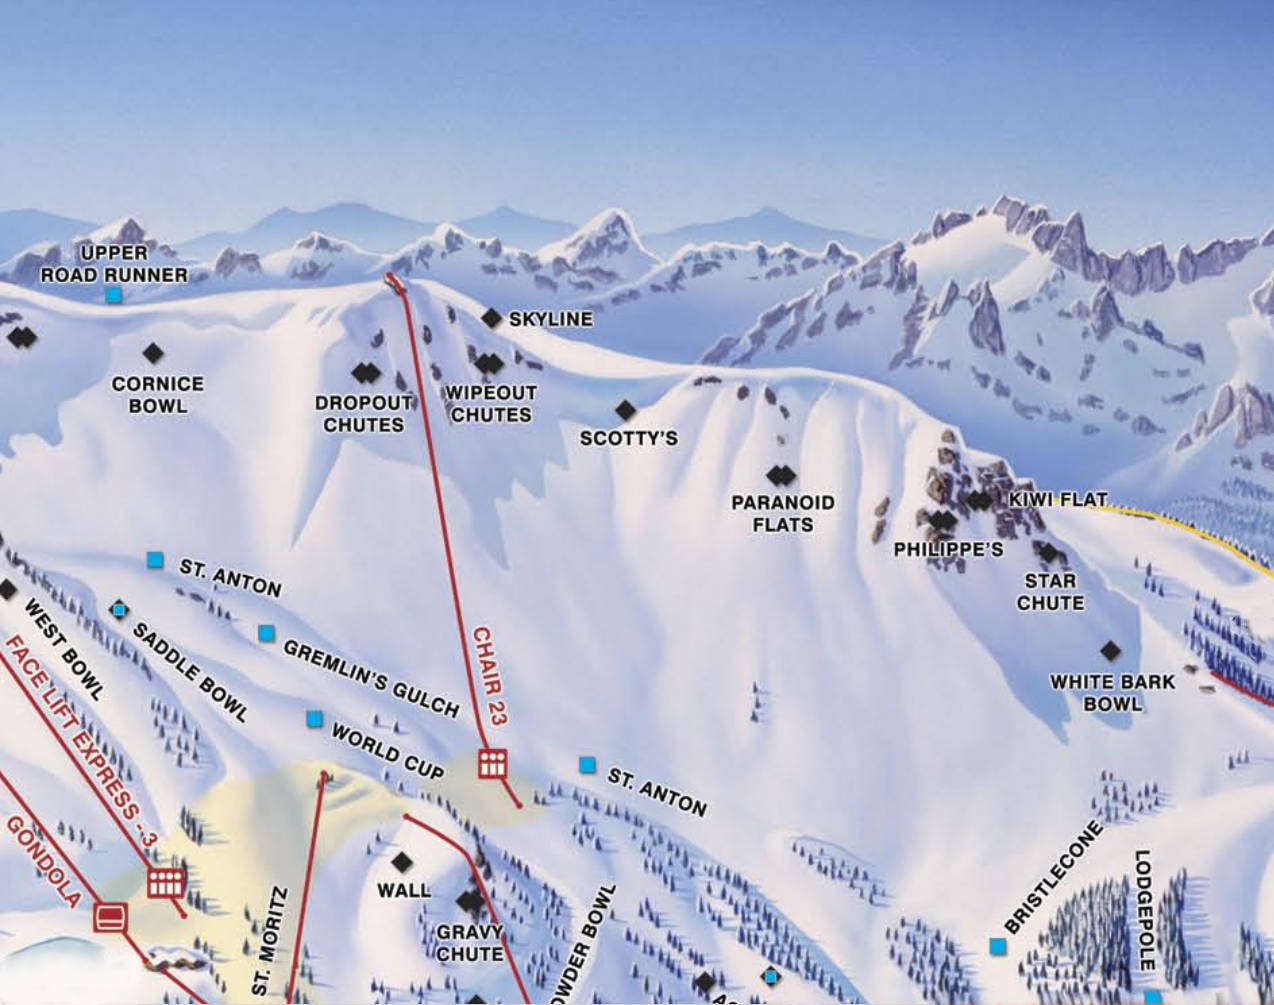 Trail map of the upper terrain of Skyline, Paranoid Flats and Philippe's at Mammoth